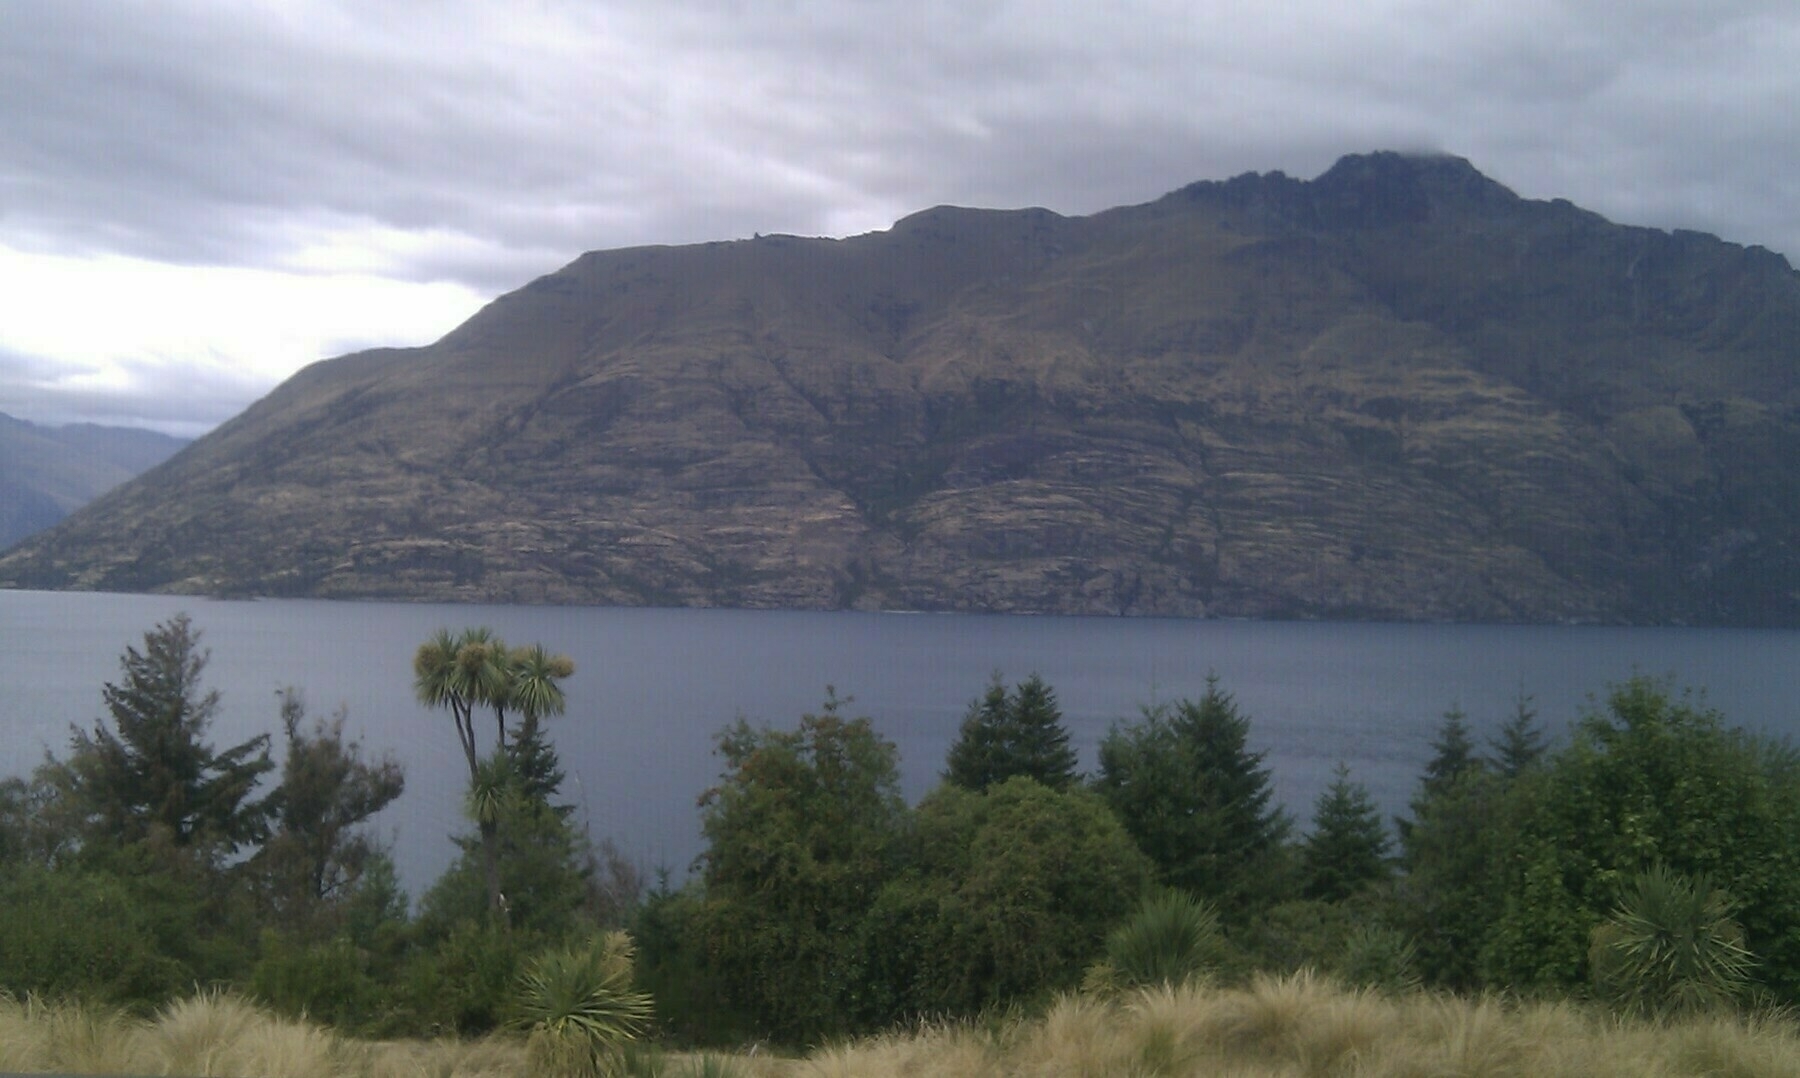 The Remarkables, Queenstown, NZ with a bit of vegetation in the foreground and Lake Wakatipu in the middle.